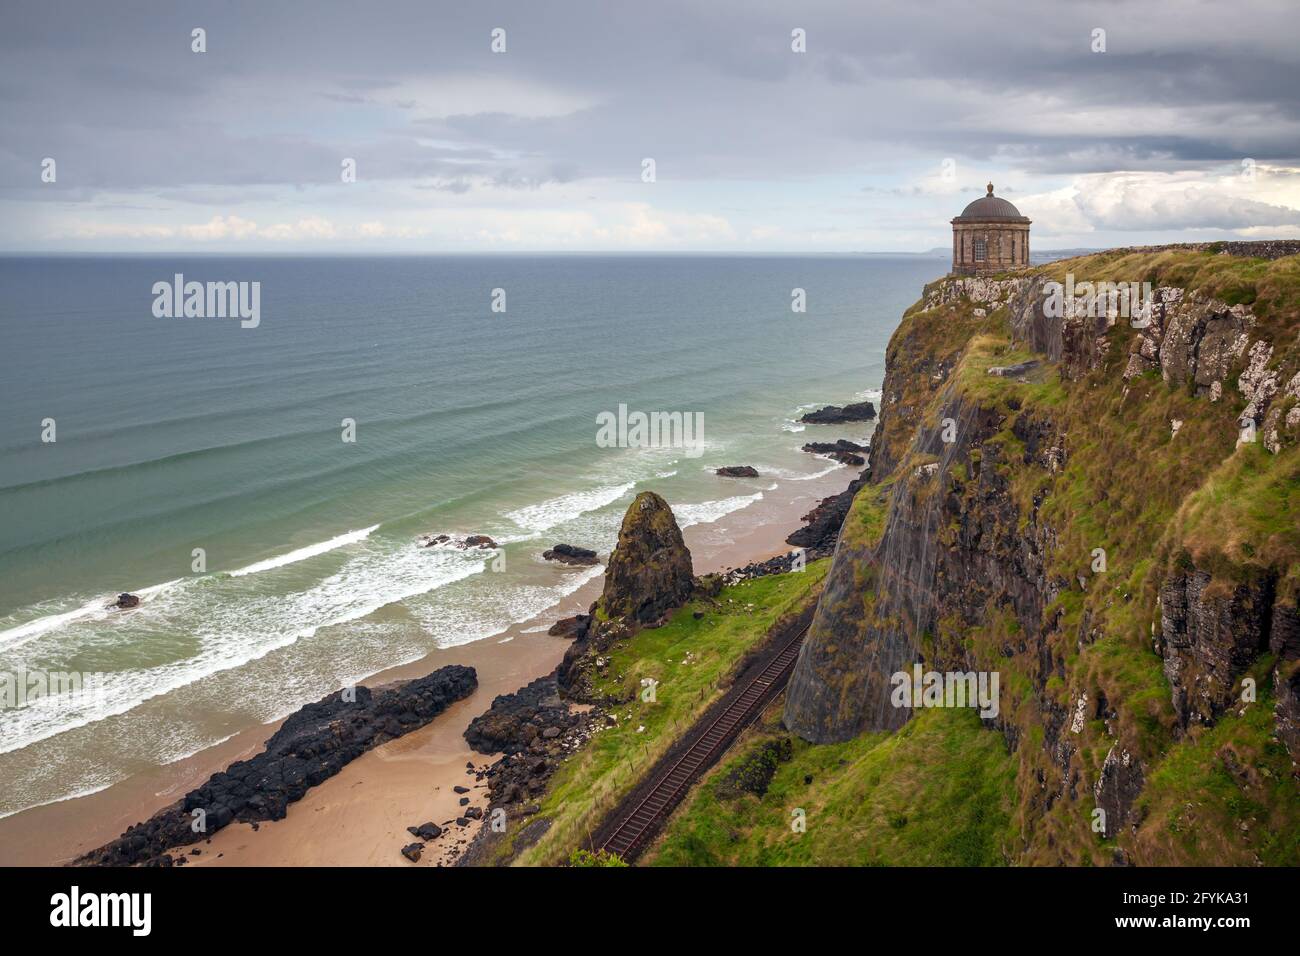 The Mussenden temple is perched on the cliffs overlooking Downhill Strand and located on the Causeway coastal route at Castlerock, County Londonderry. Stock Photo